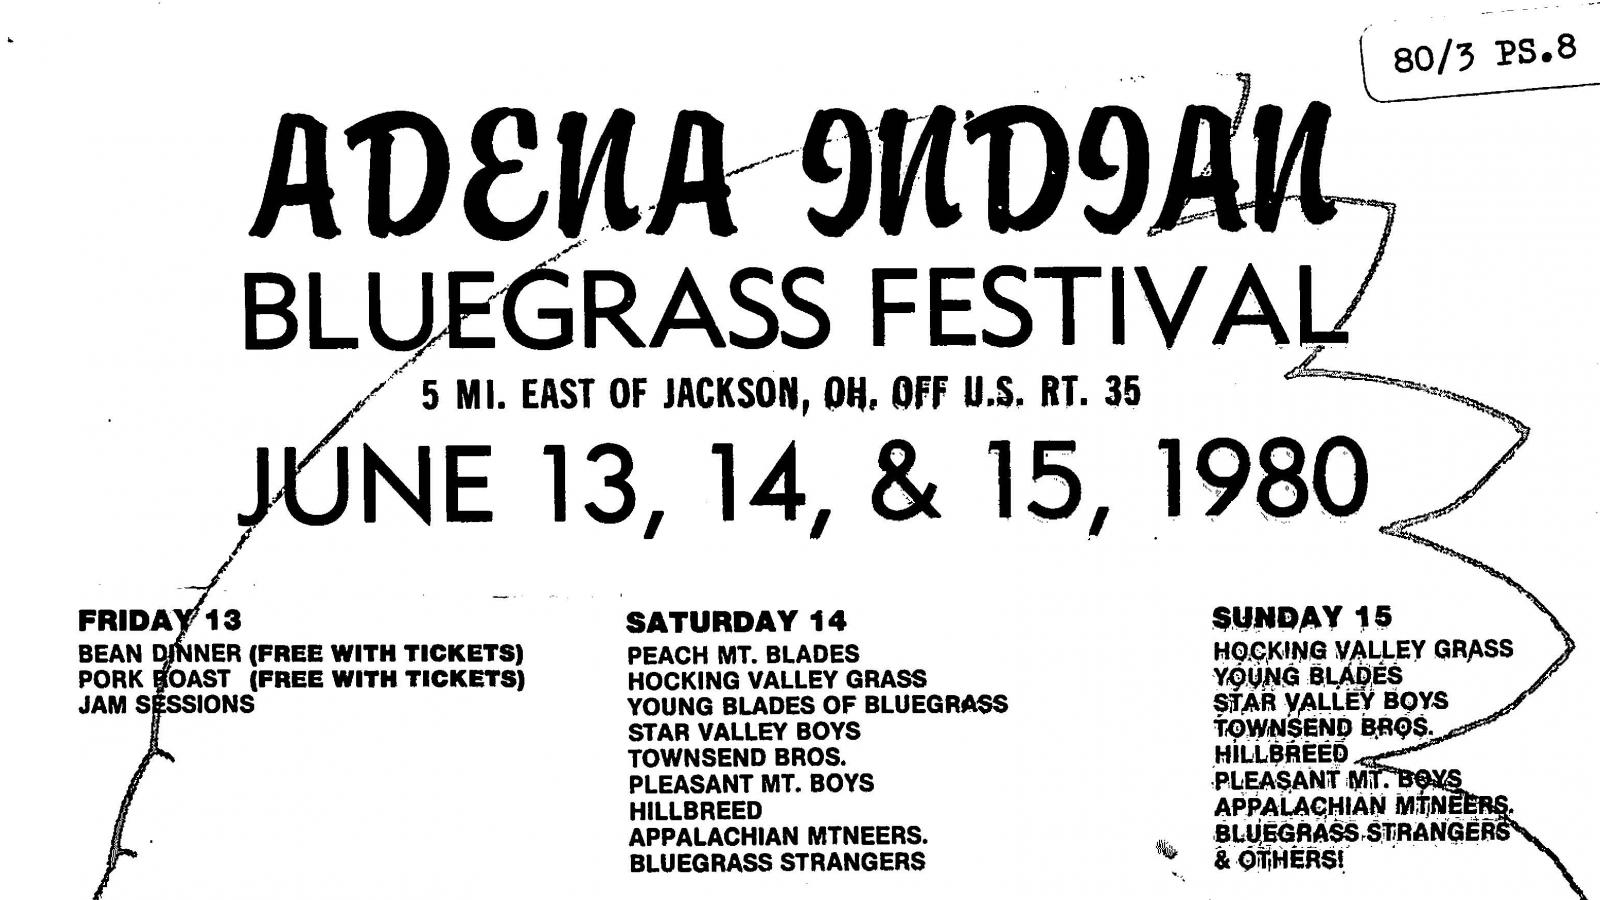 Promotional poster for the Adena Indian Bluegrass Festival, held southeast of Jackson, Ohio, on June 13,14, and 15, 1980